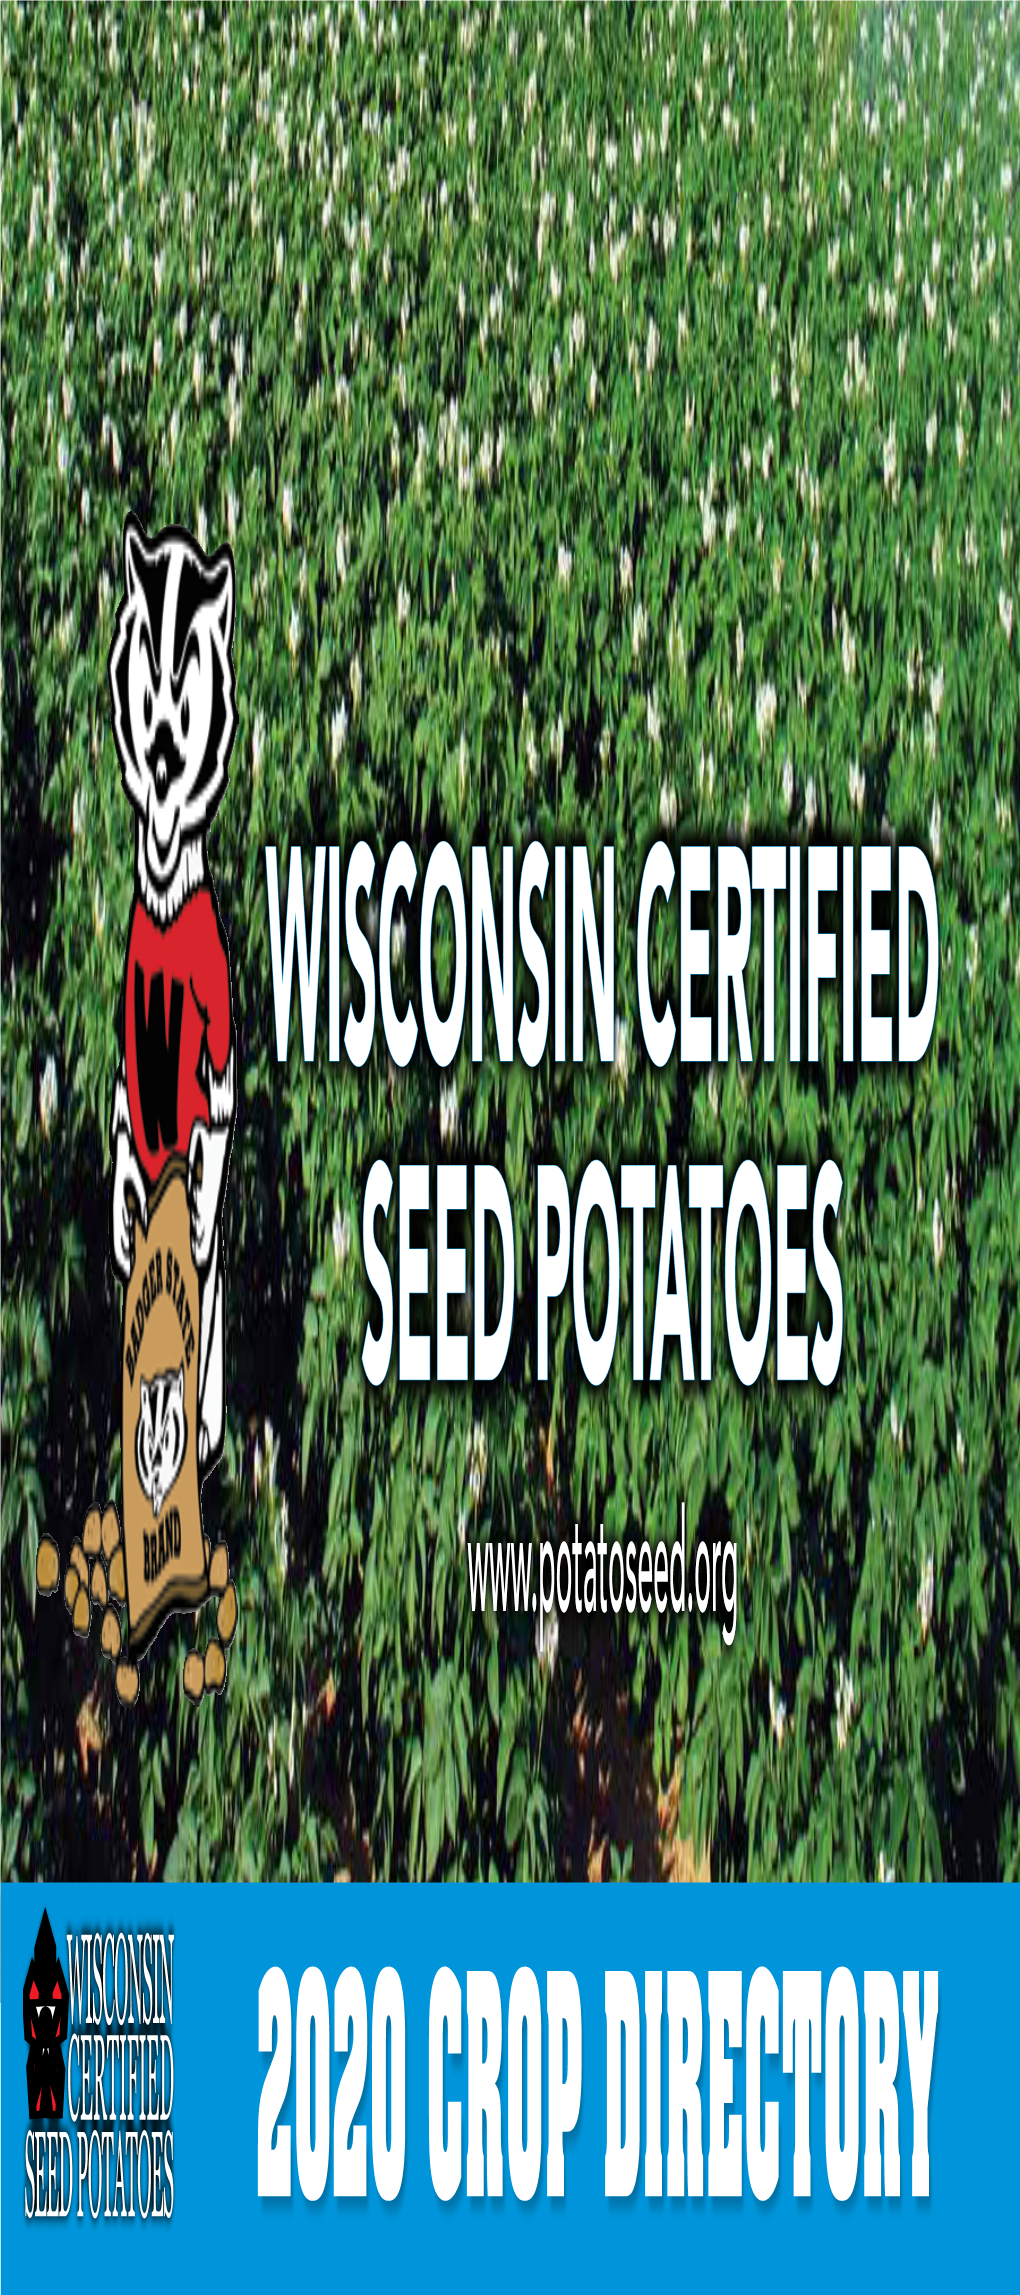 Wisconsin Certified Seed Potatoes Seed Potatoes Wisconsin Certified Seed Potatoes